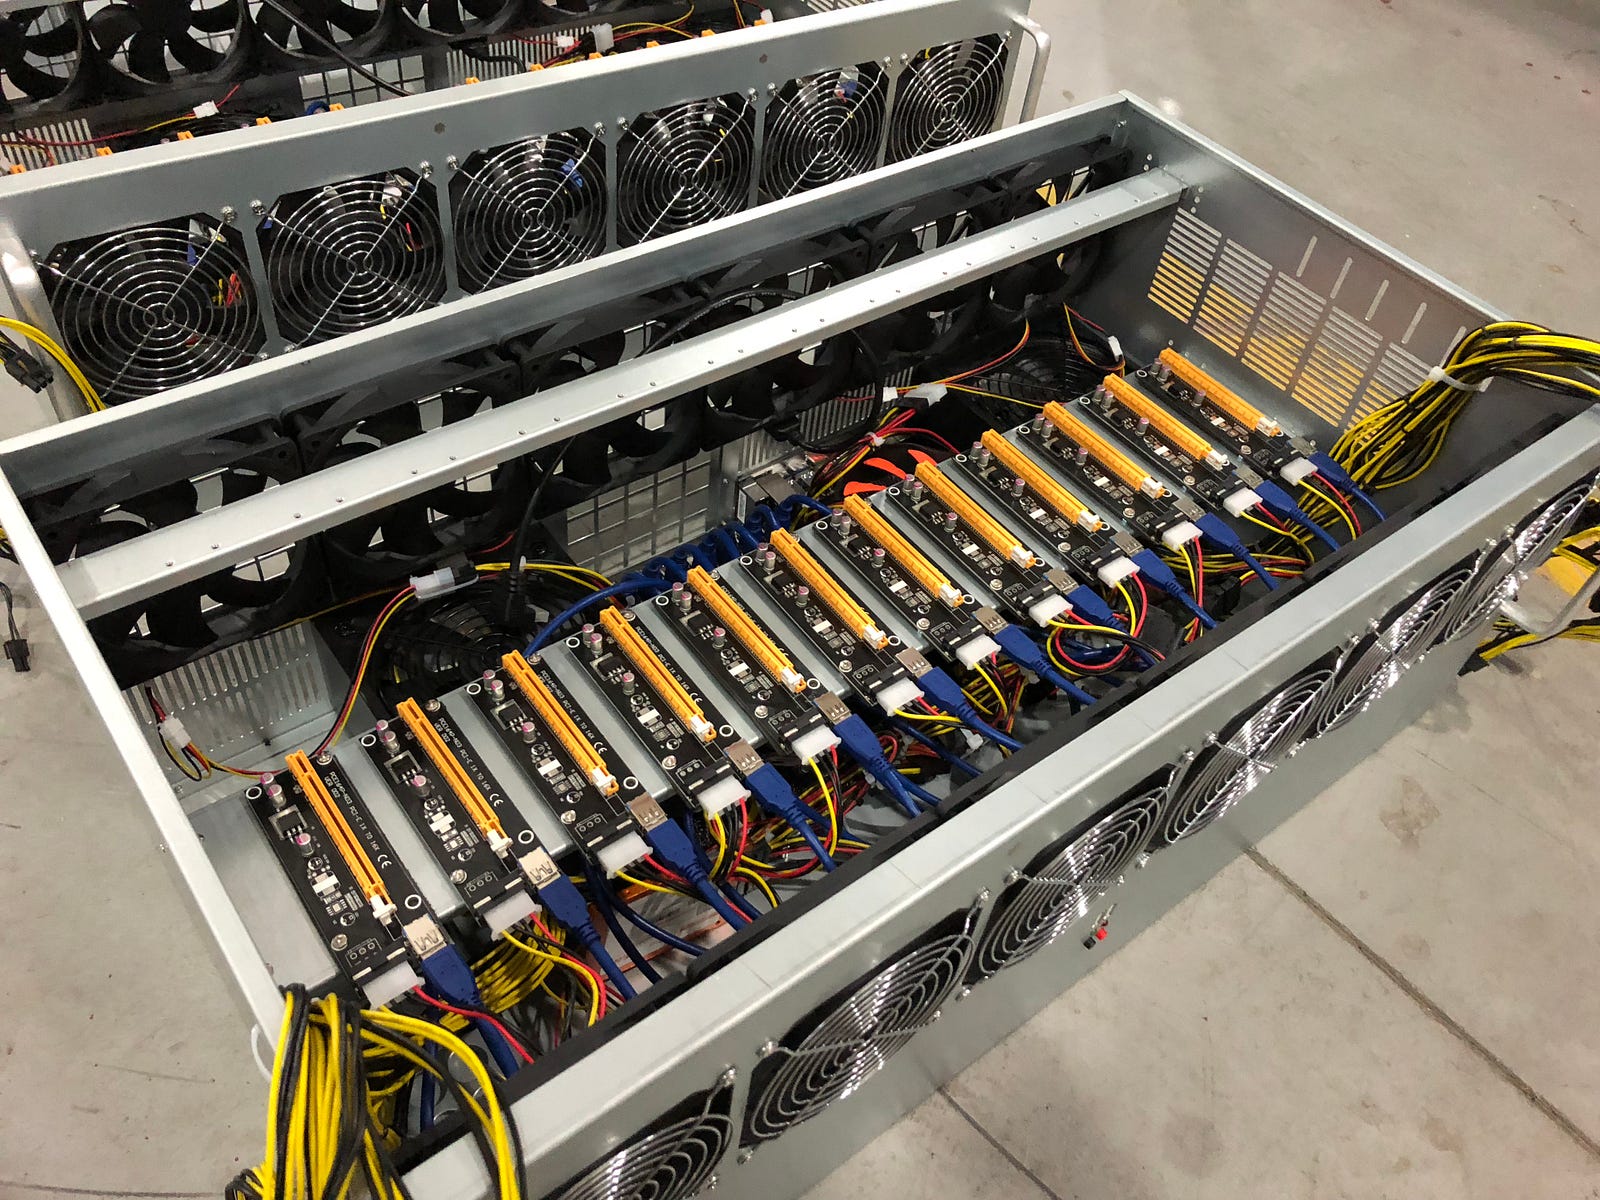 graphic card for mining ethereum